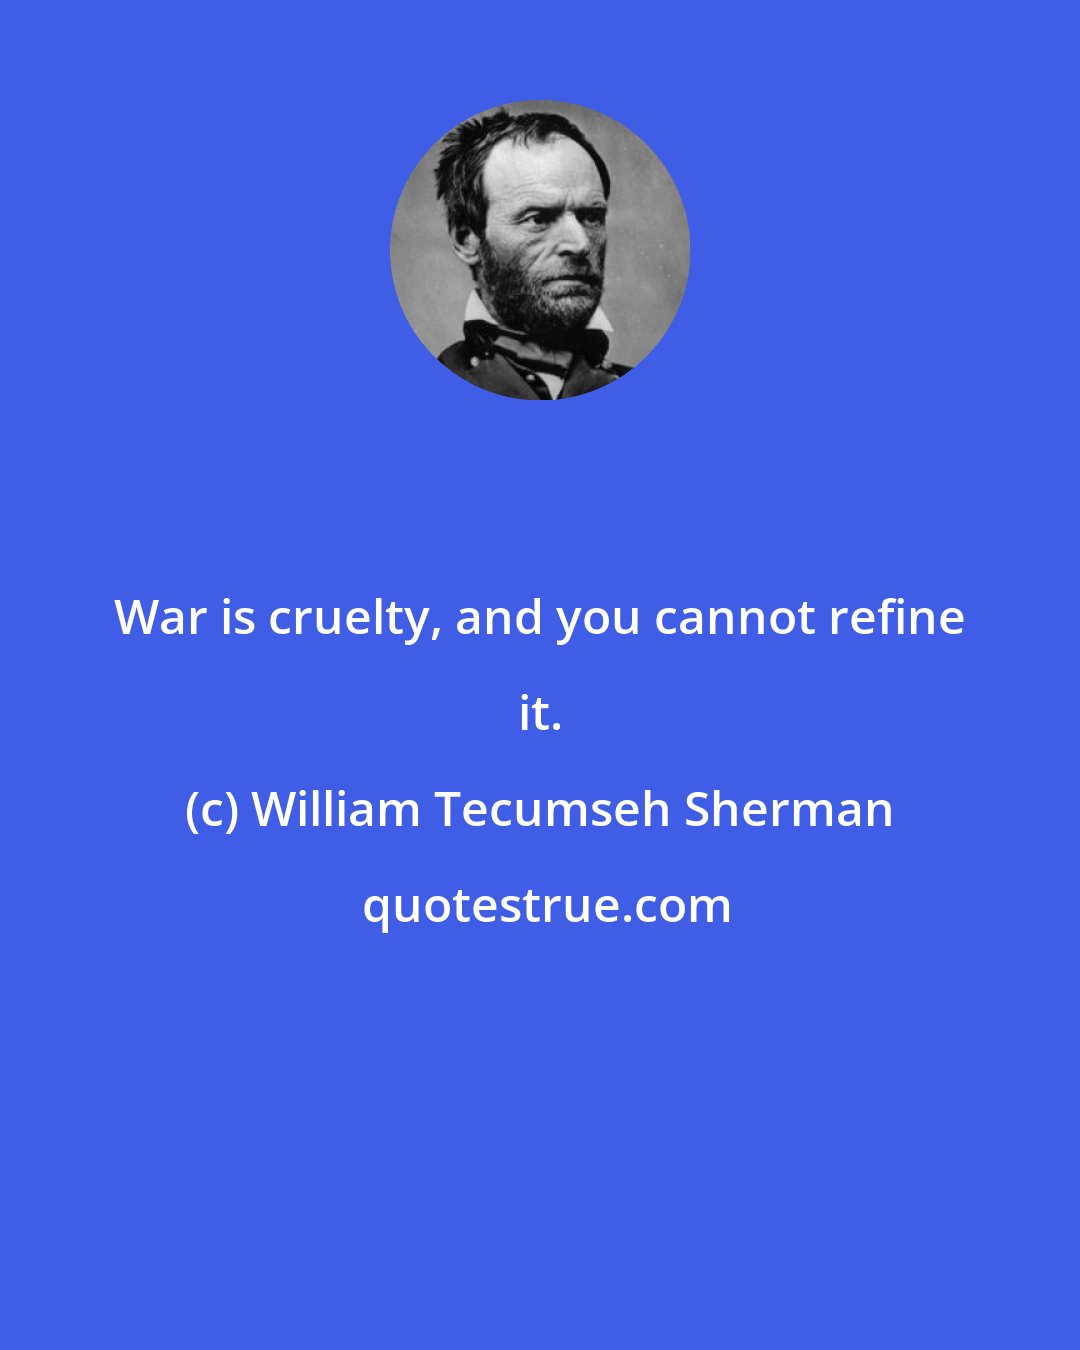 William Tecumseh Sherman: War is cruelty, and you cannot refine it.